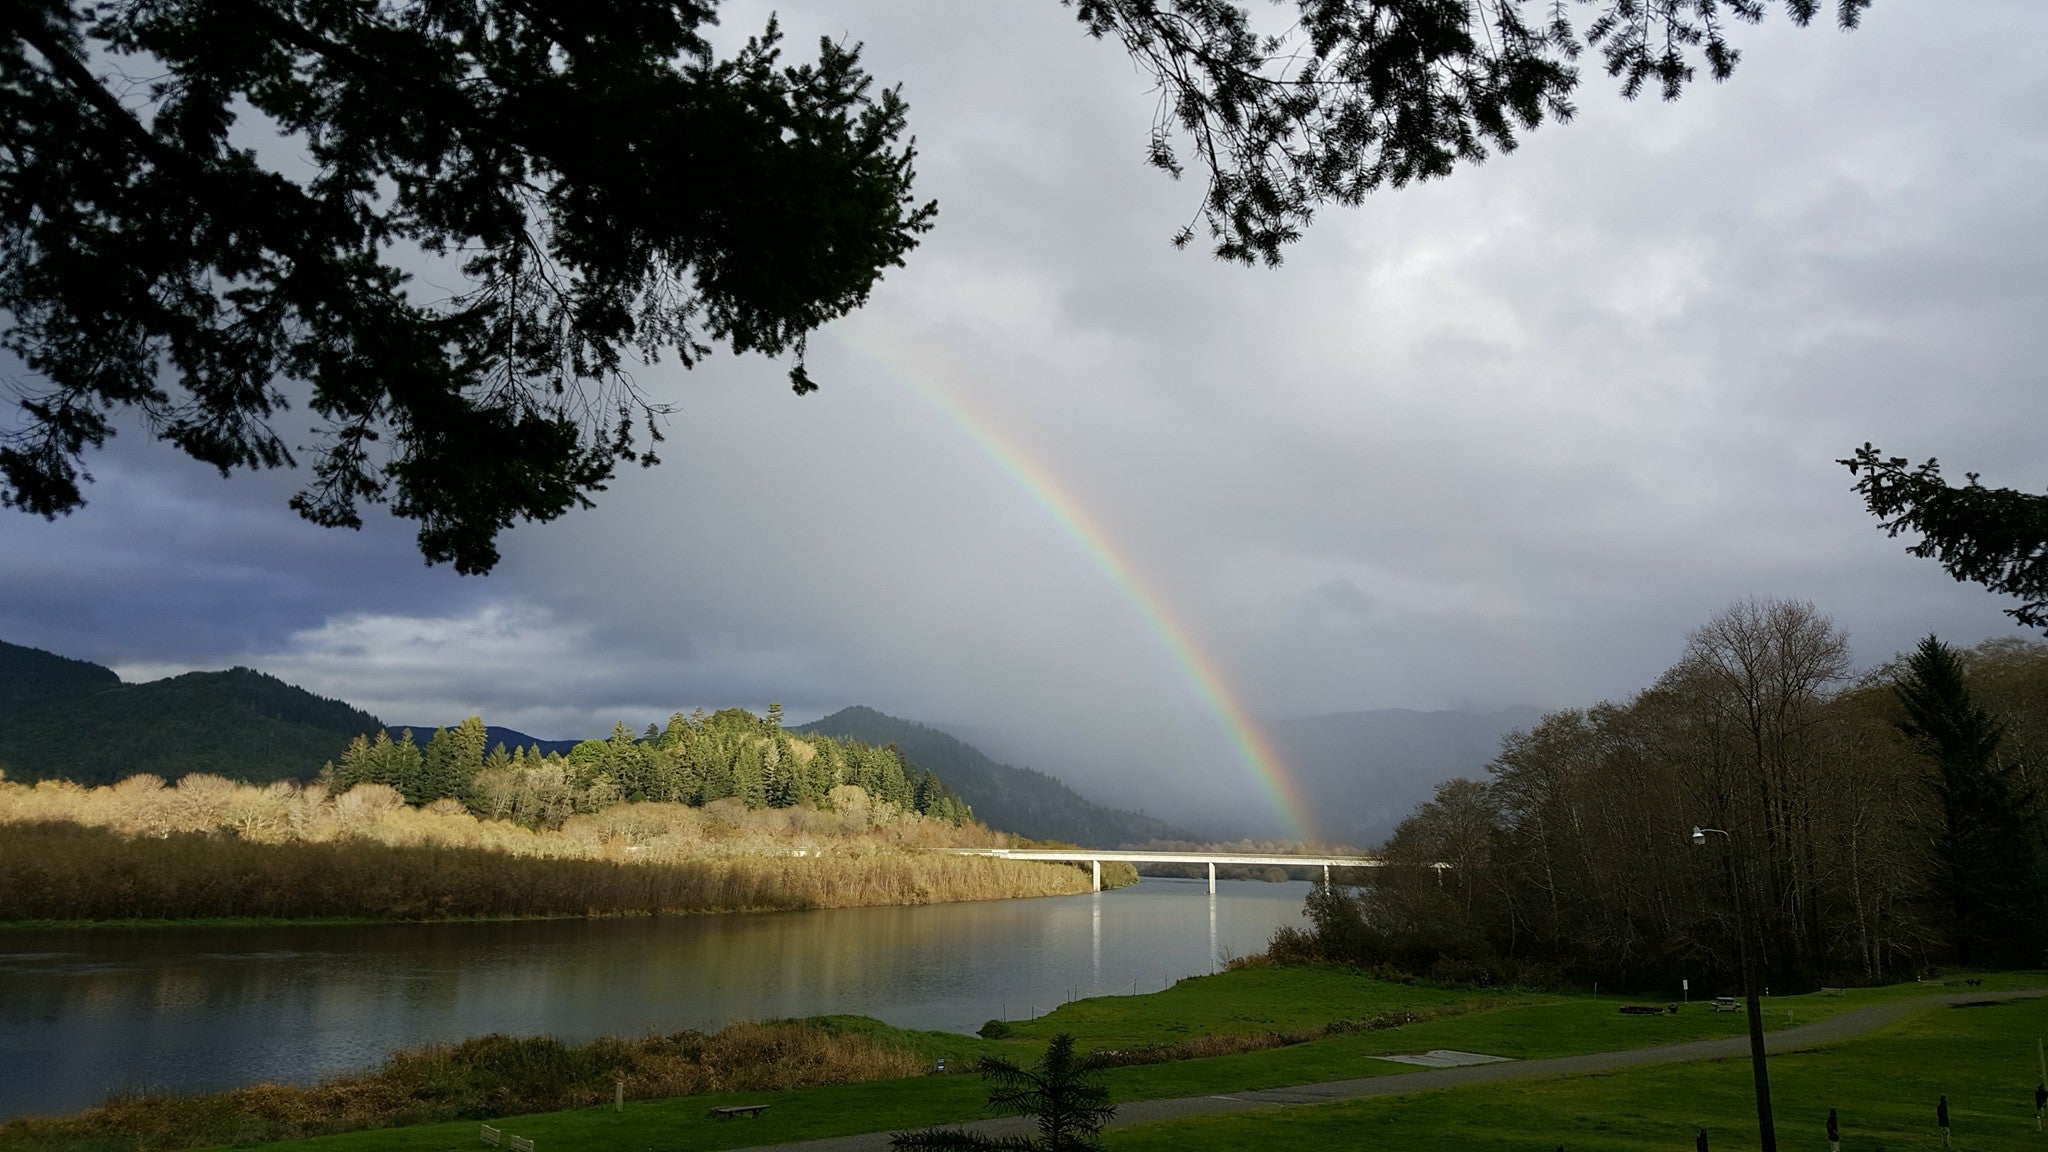 Camper submitted image from klamath river rv park - 2